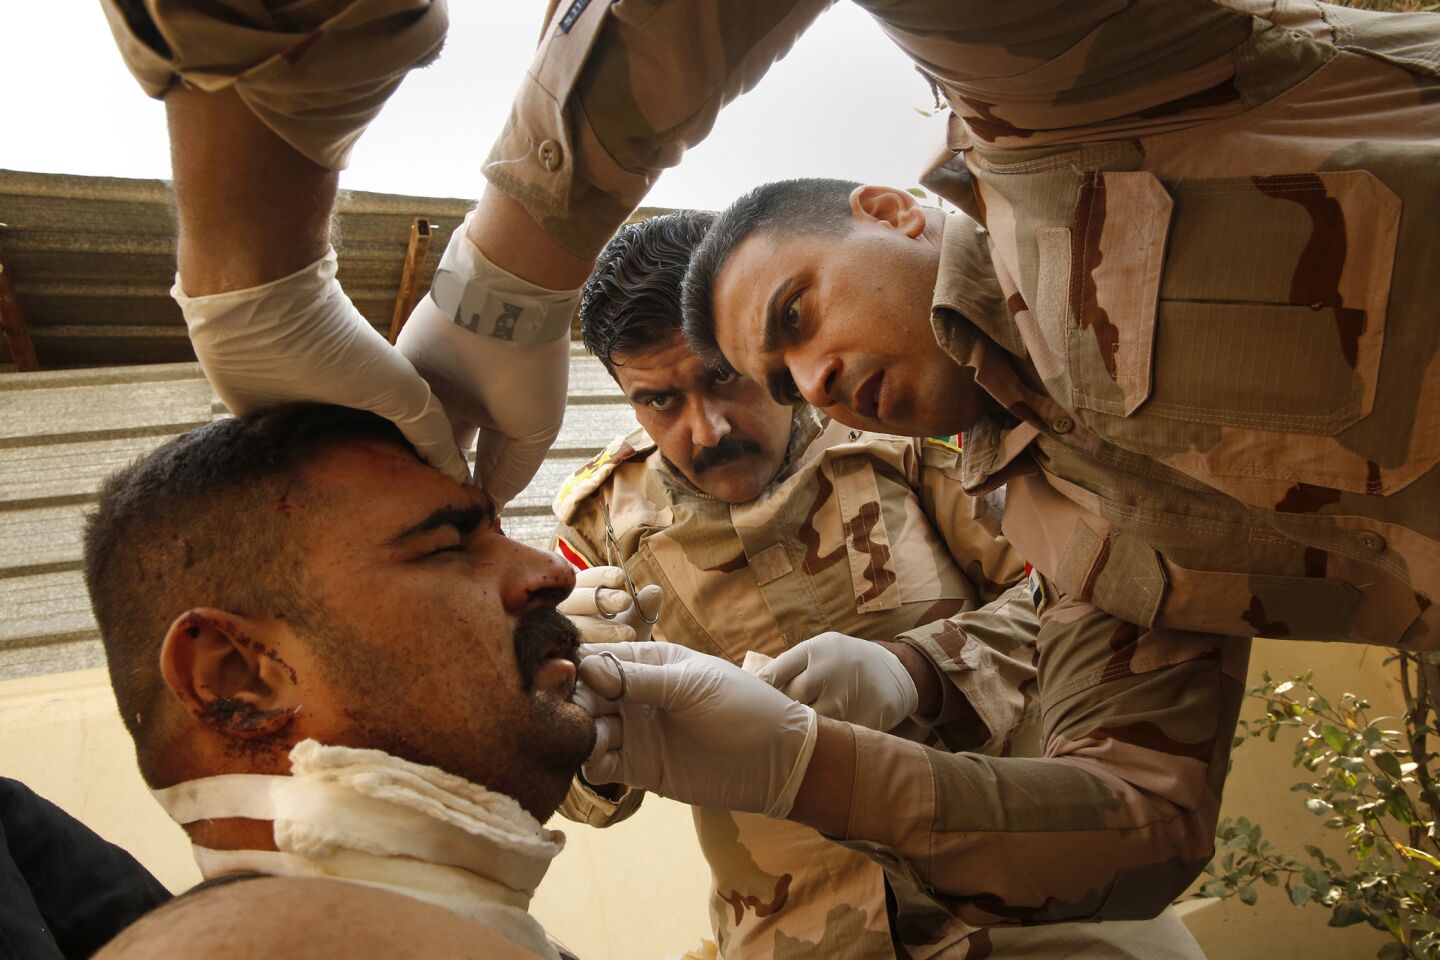 Capt. Osama Fuad Rauf, 33, center, and Maj. Mohammed Hassan Abdullah, left, 35, treat a soldier who was wounded in the fight against Islamic State near Mosul.